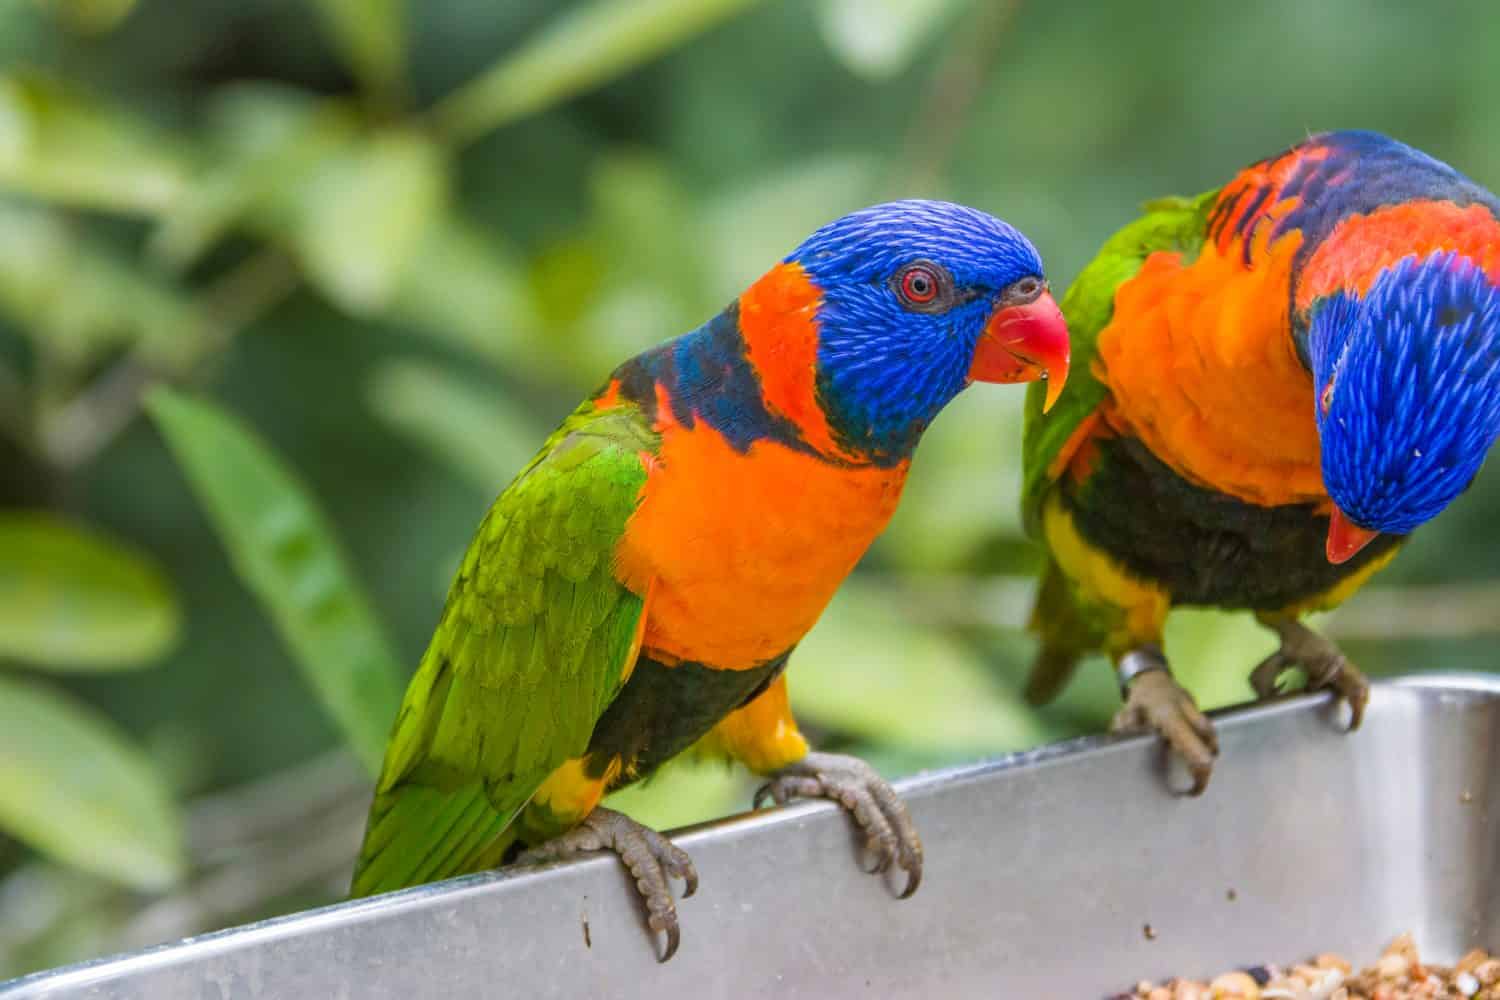 The red-collared lorikeet (Trichoglossus rubritorquis) is a species of parrot found in wooded habitats in northern Australia